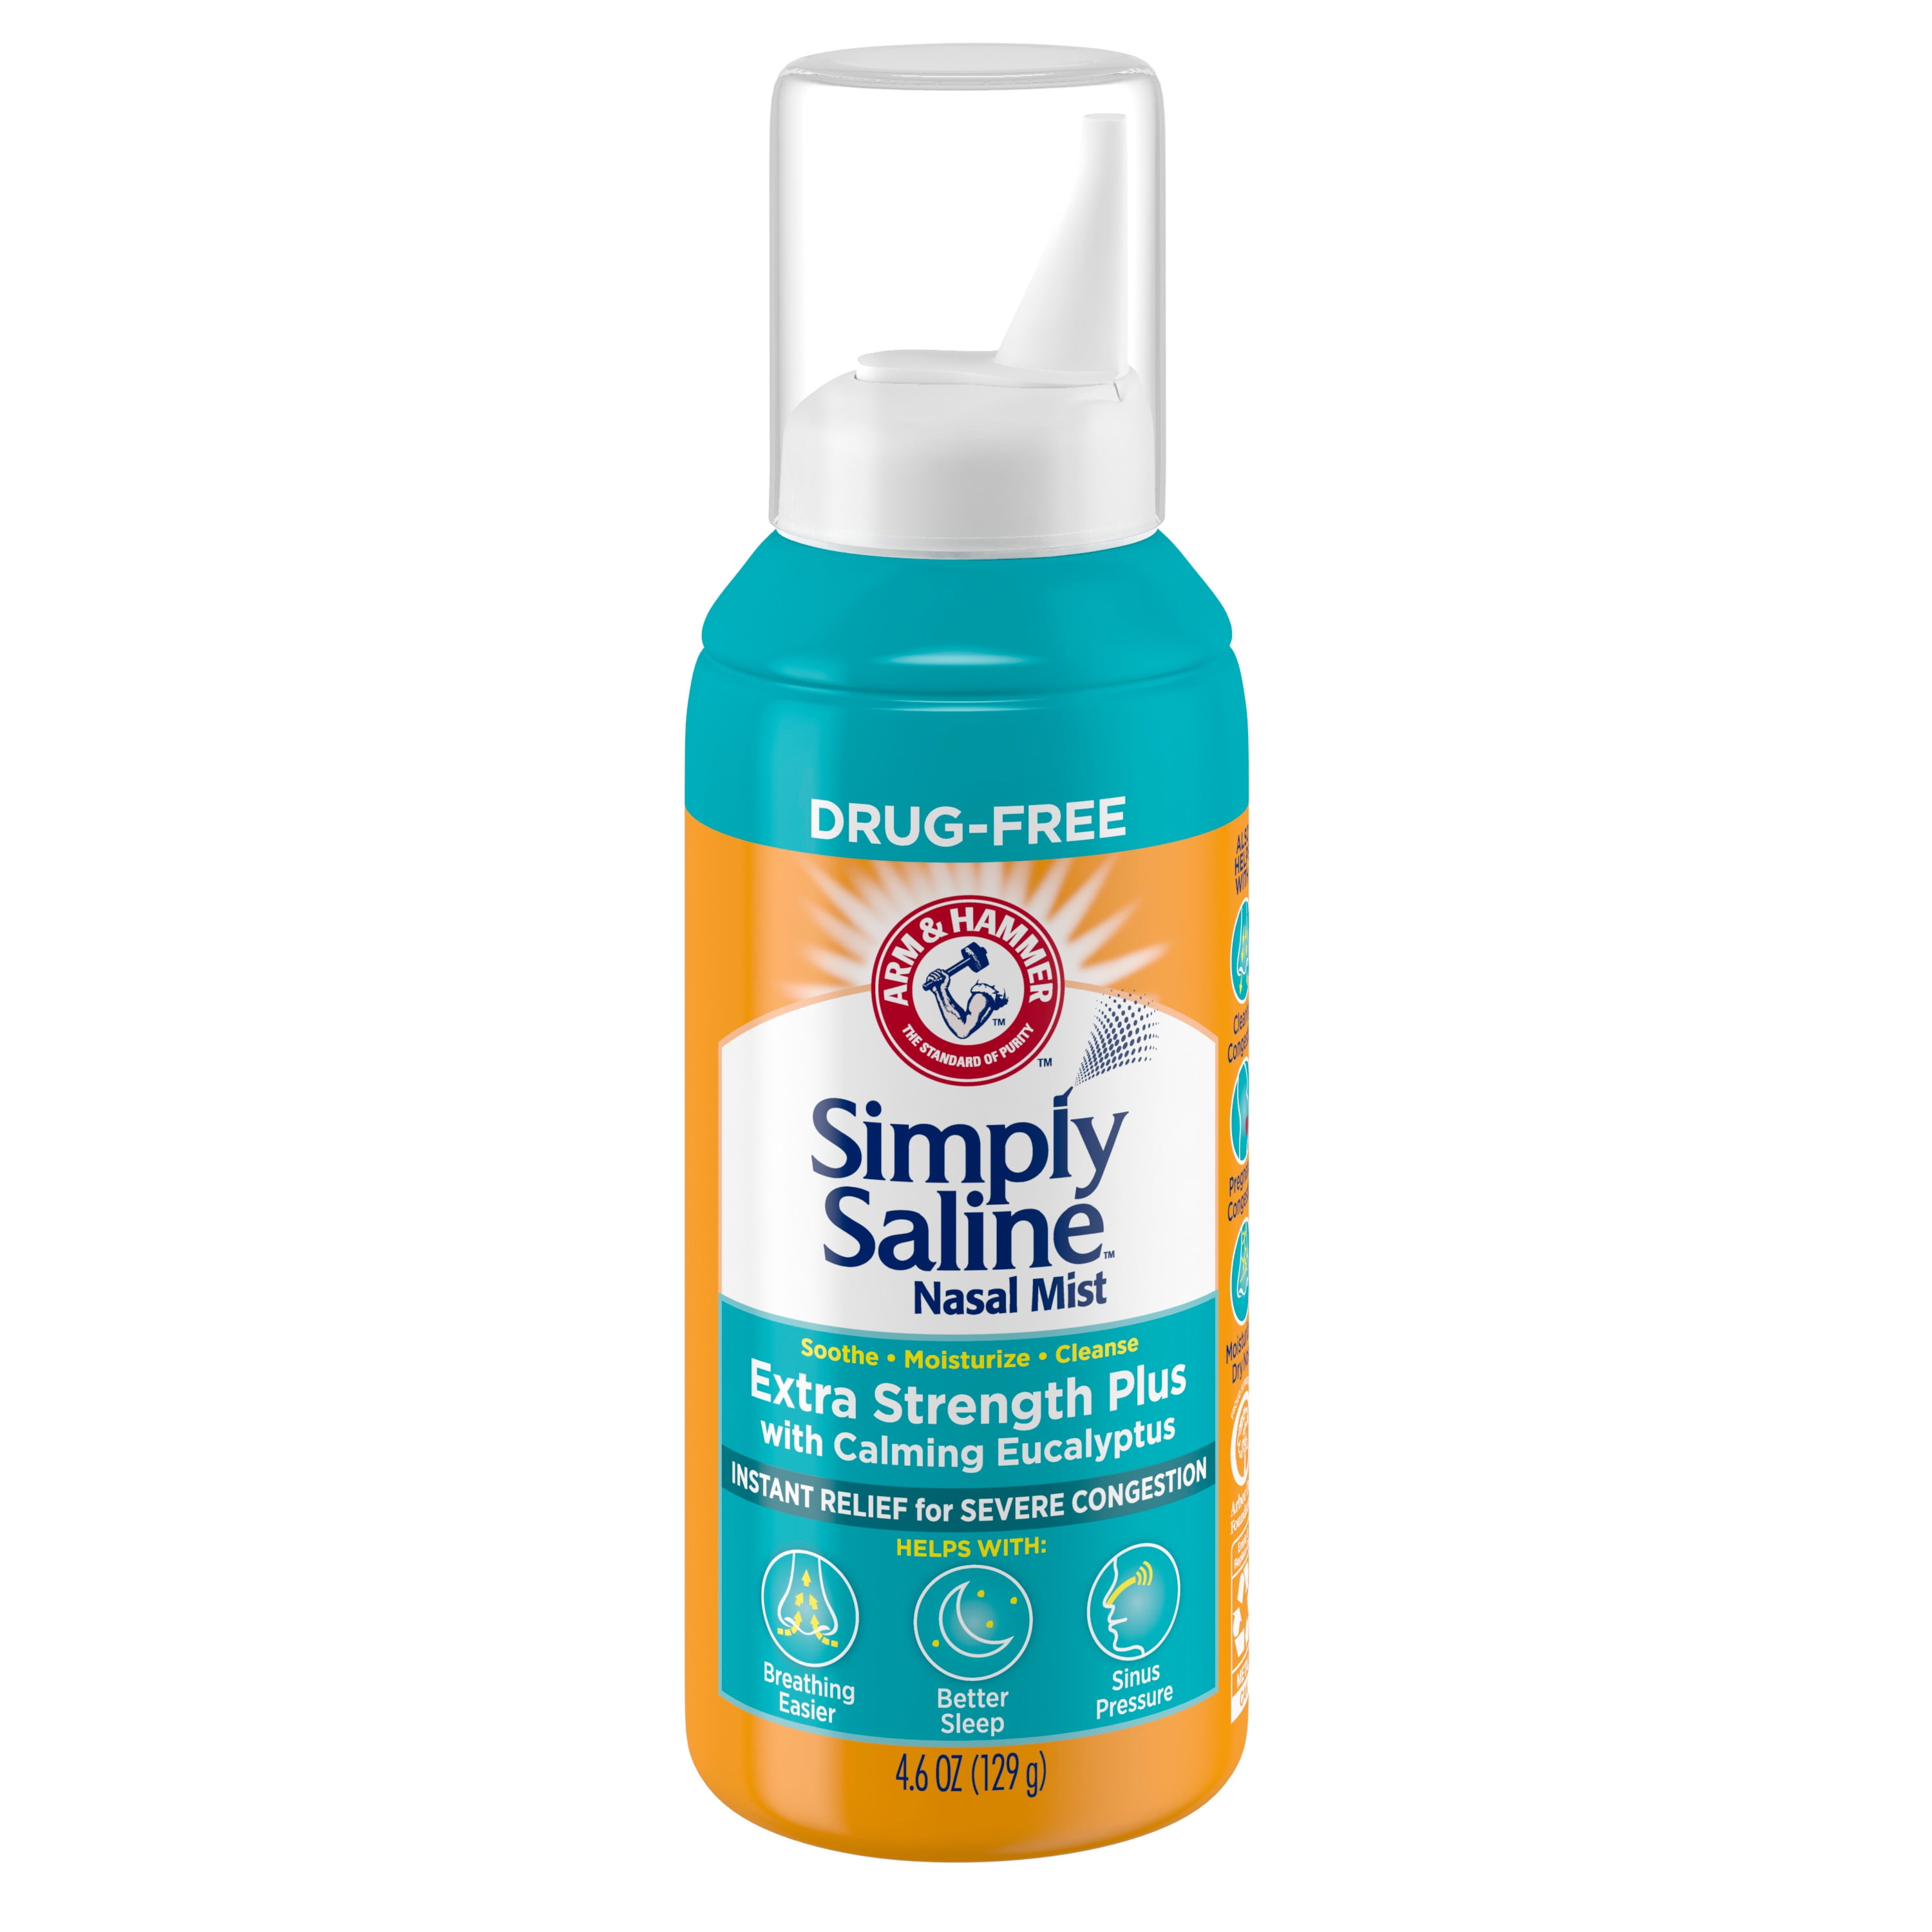 Simply Saline Extra Strength Plus with Calming Eucalyptus for Severe Congestion Relief Nasal Mist: 4.6oz